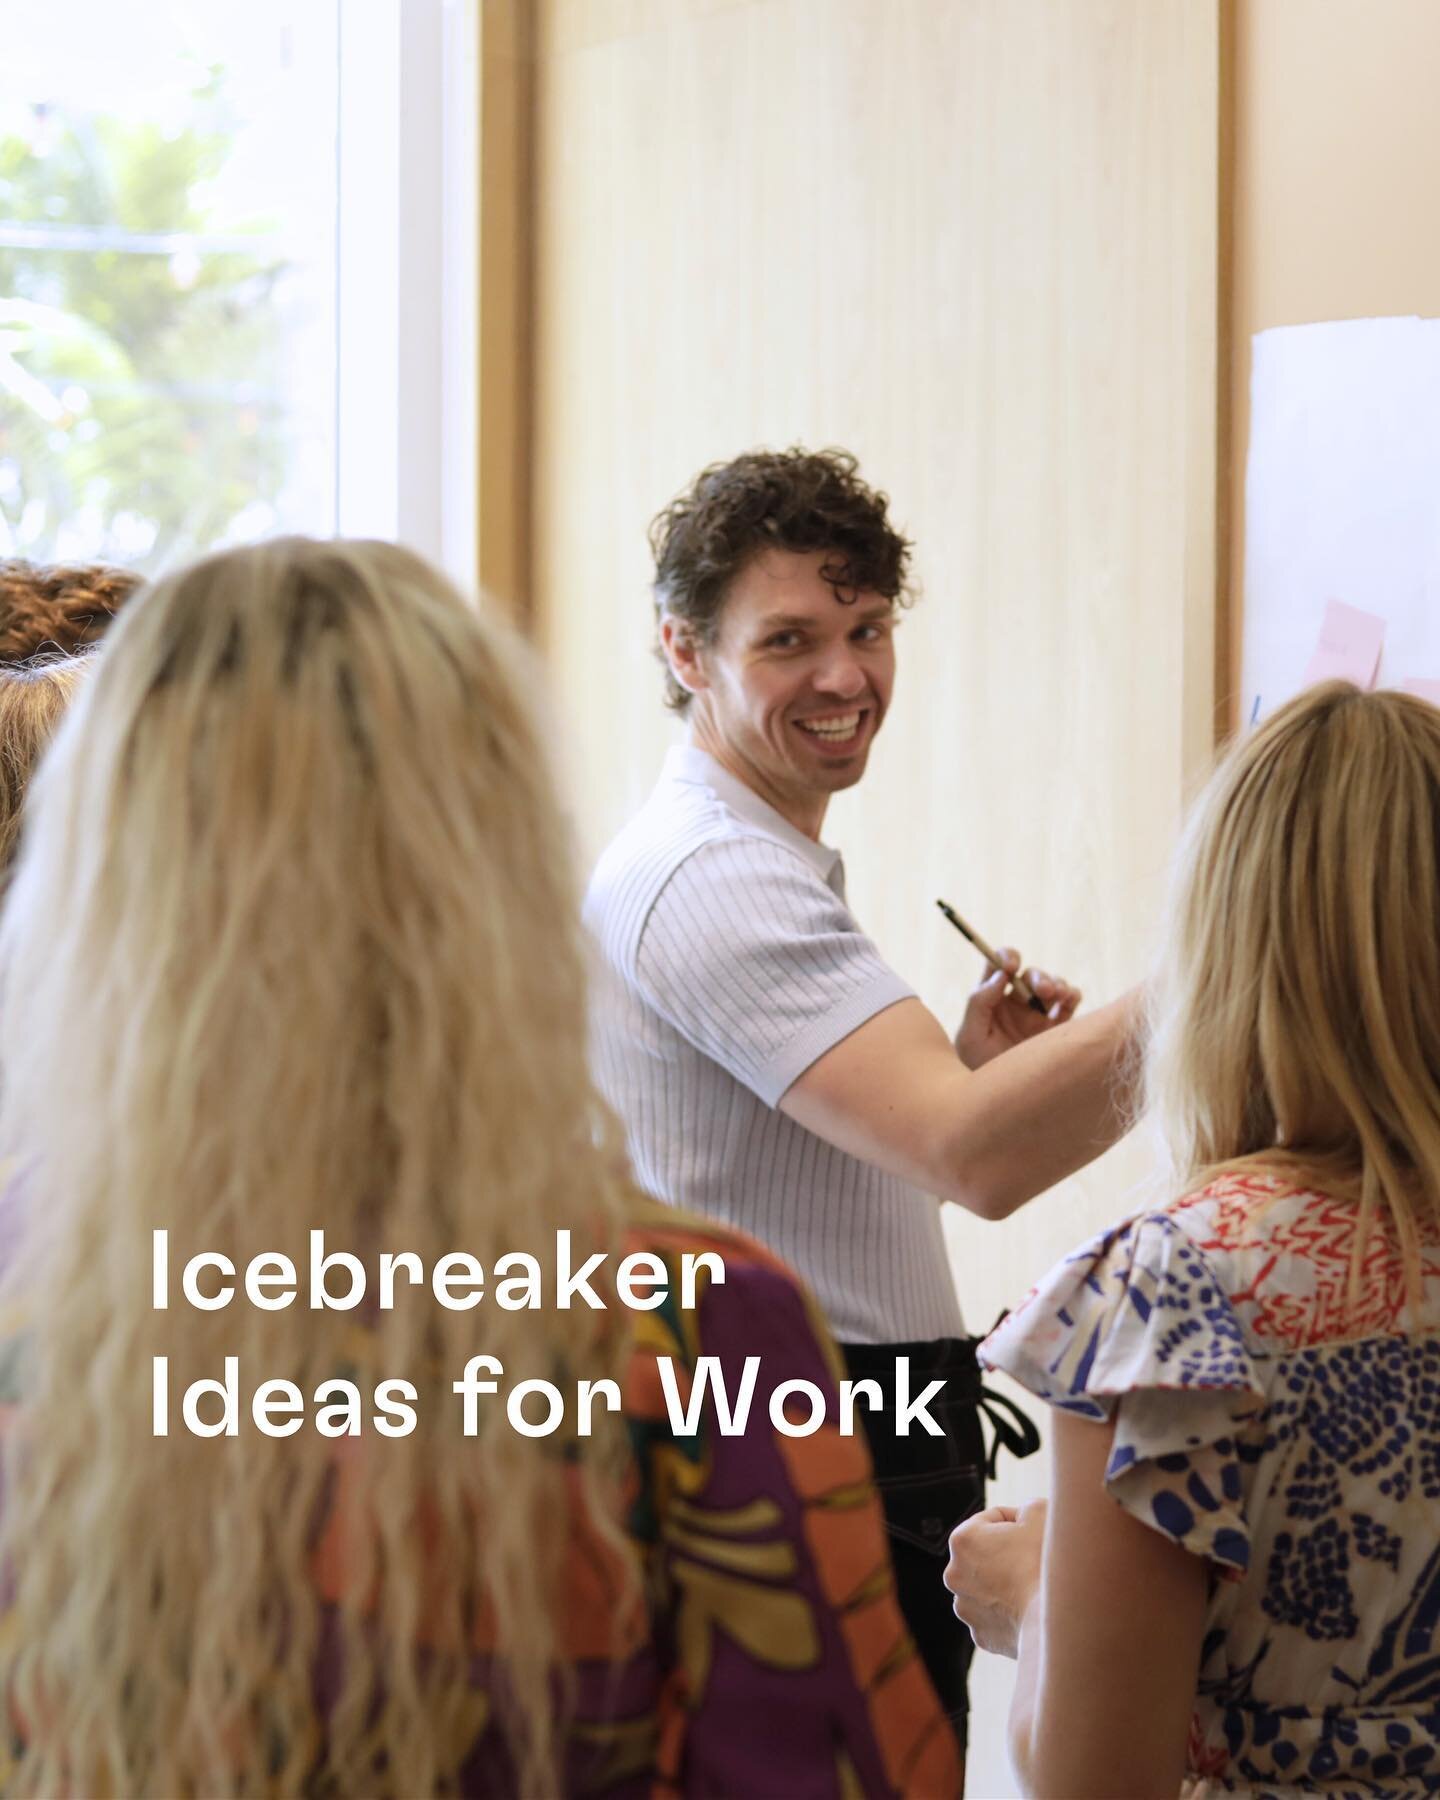 Our template library features an assortment of engaging icebreakers designed for team events. 

Download our free icebreaker templates in the link in our bio.